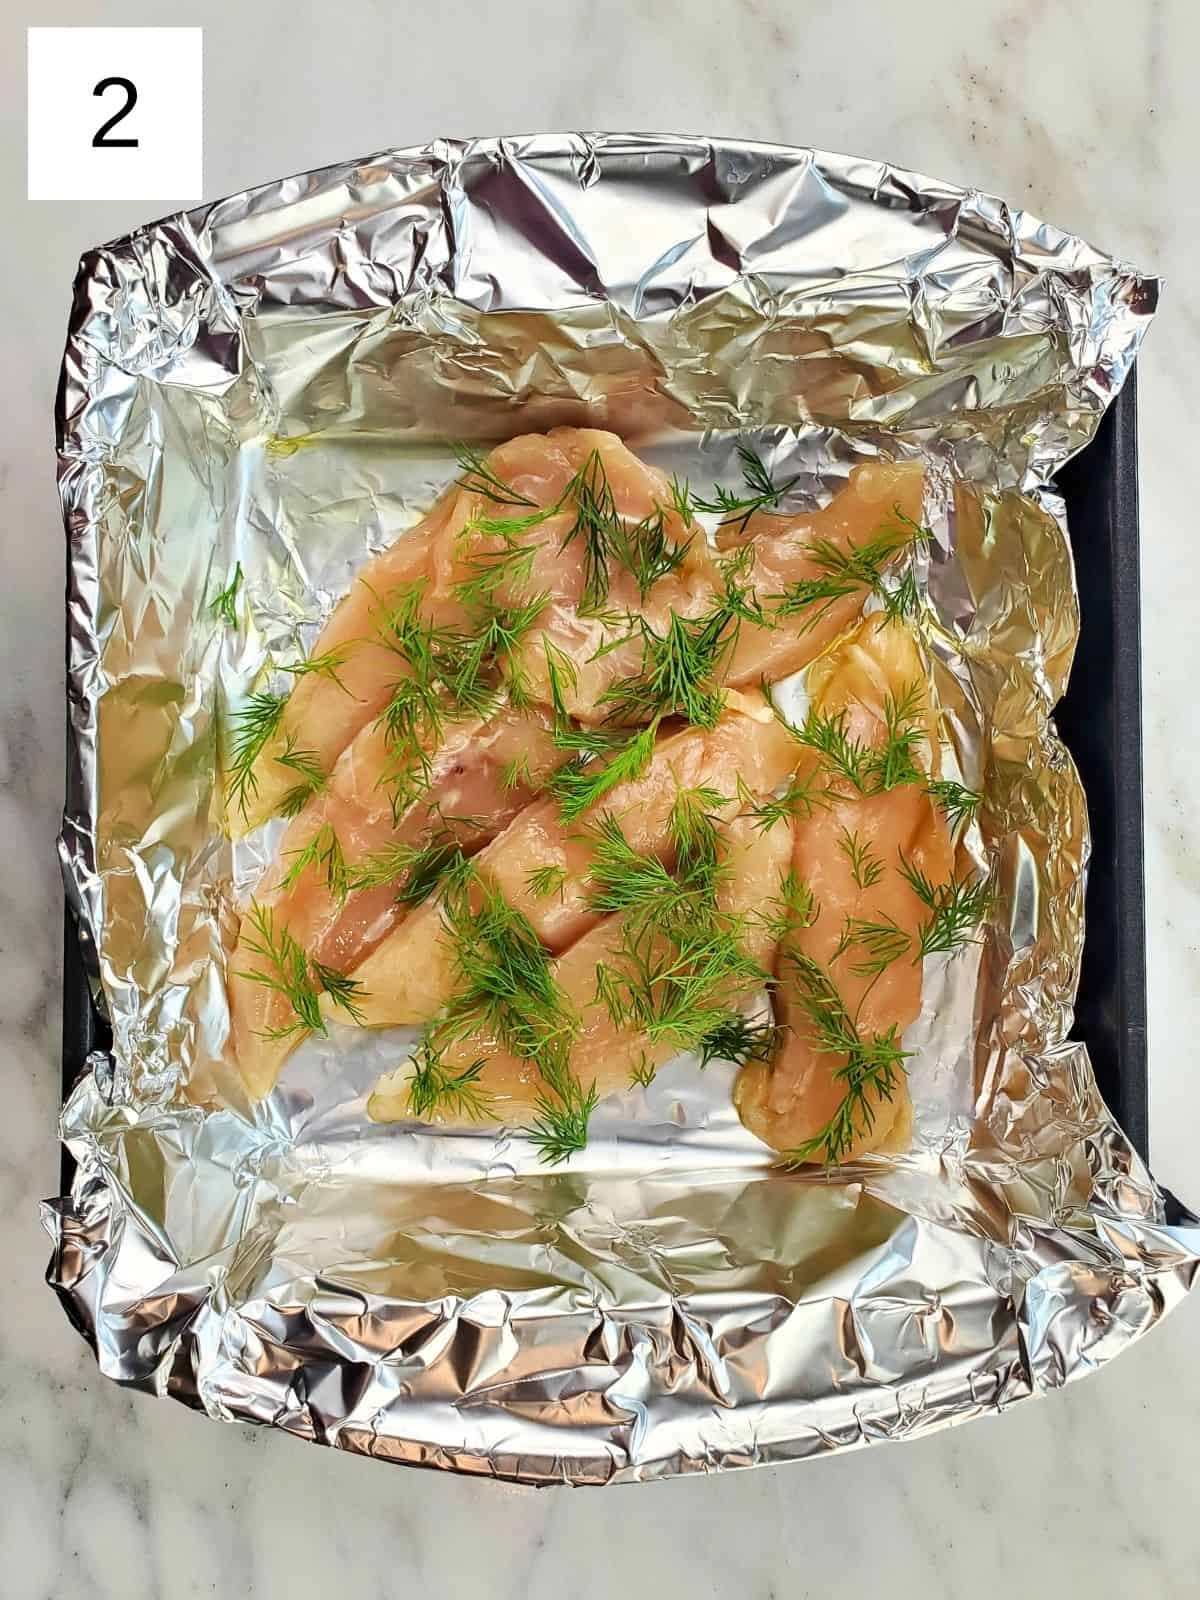 chicken tenders, topped with fresh dill, olive oil, and sea salt, arranged on a foil-lined baking tray.